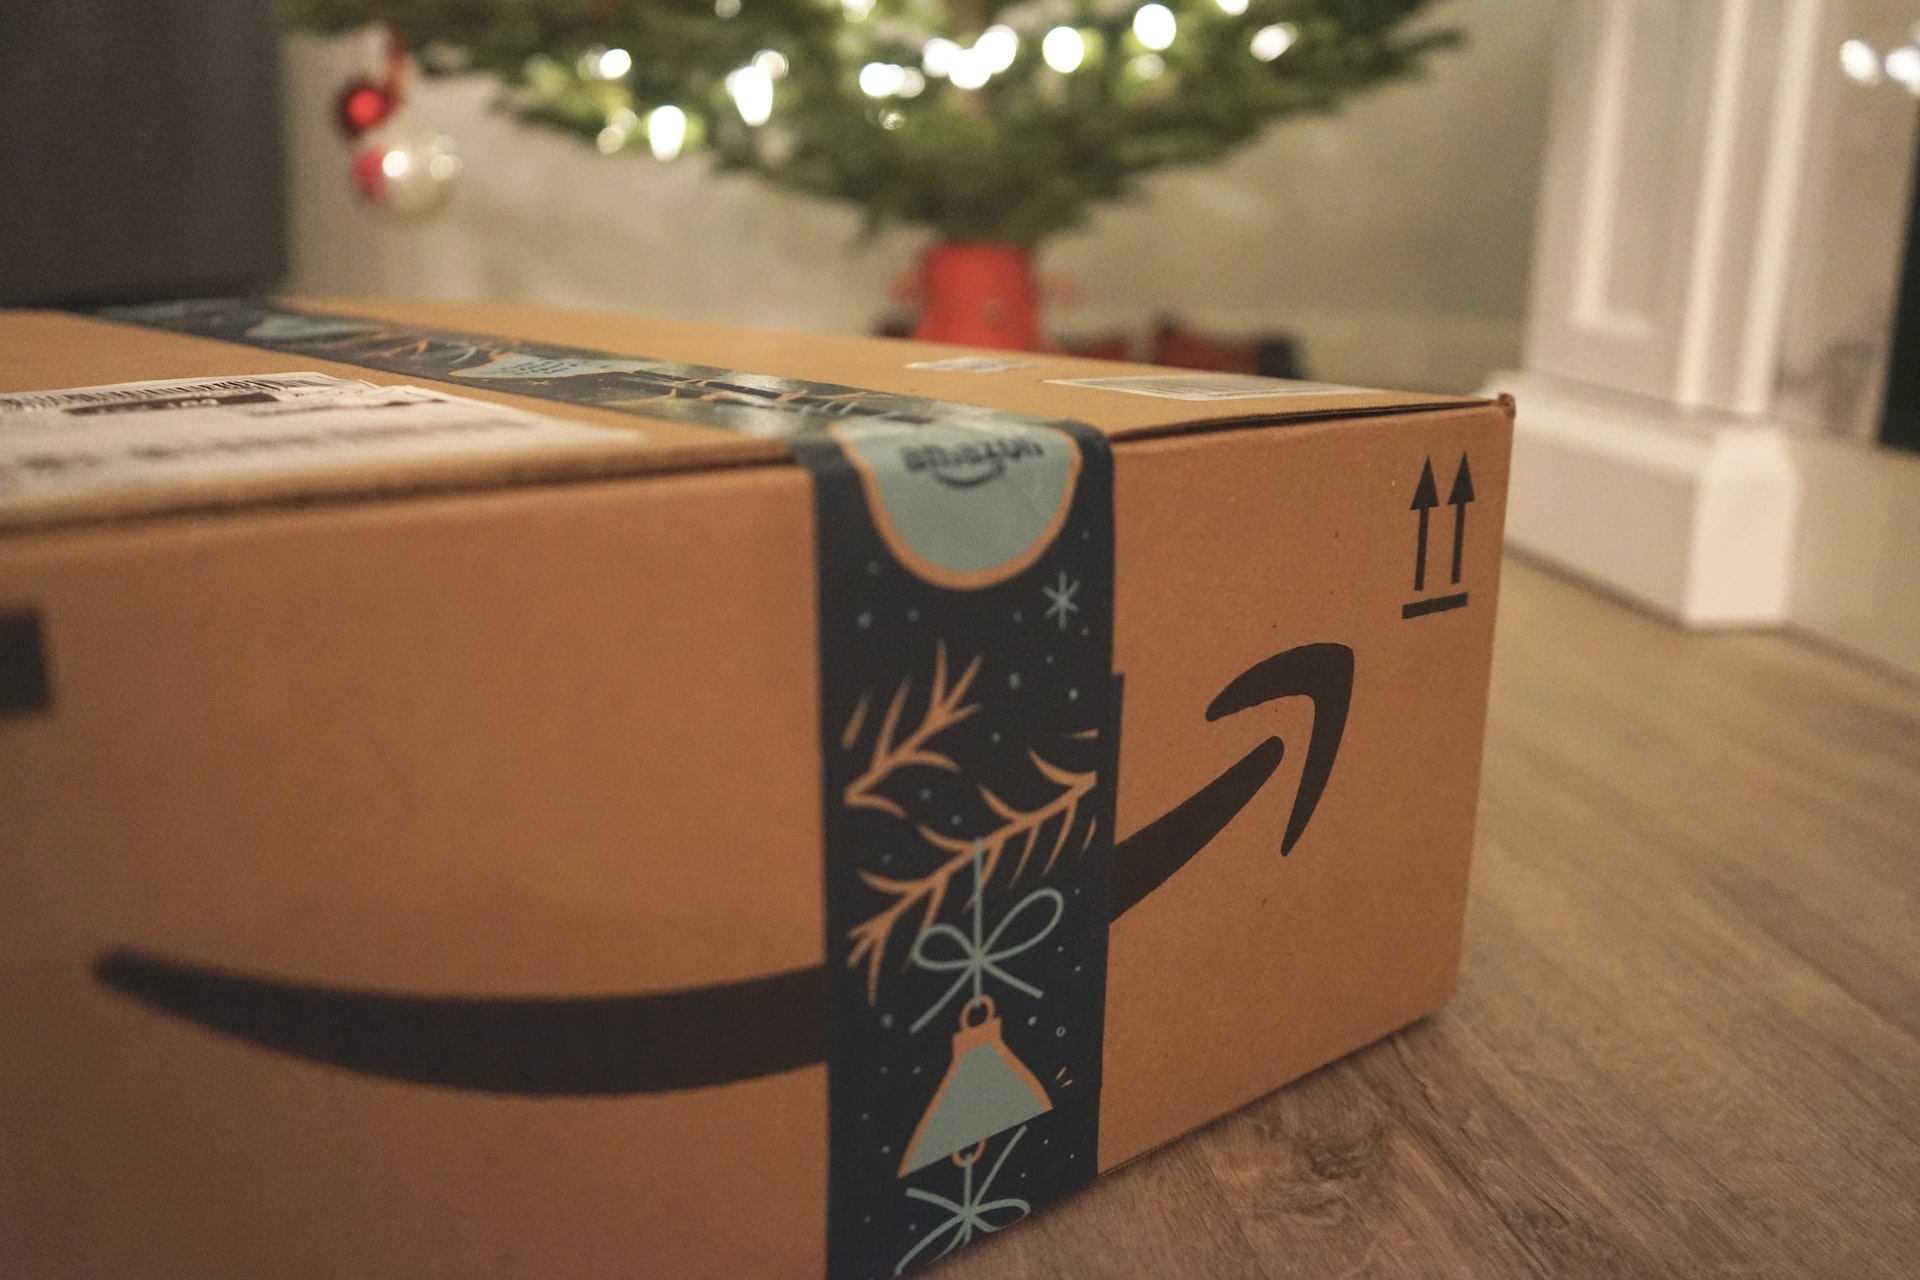 Image of an Amazon package